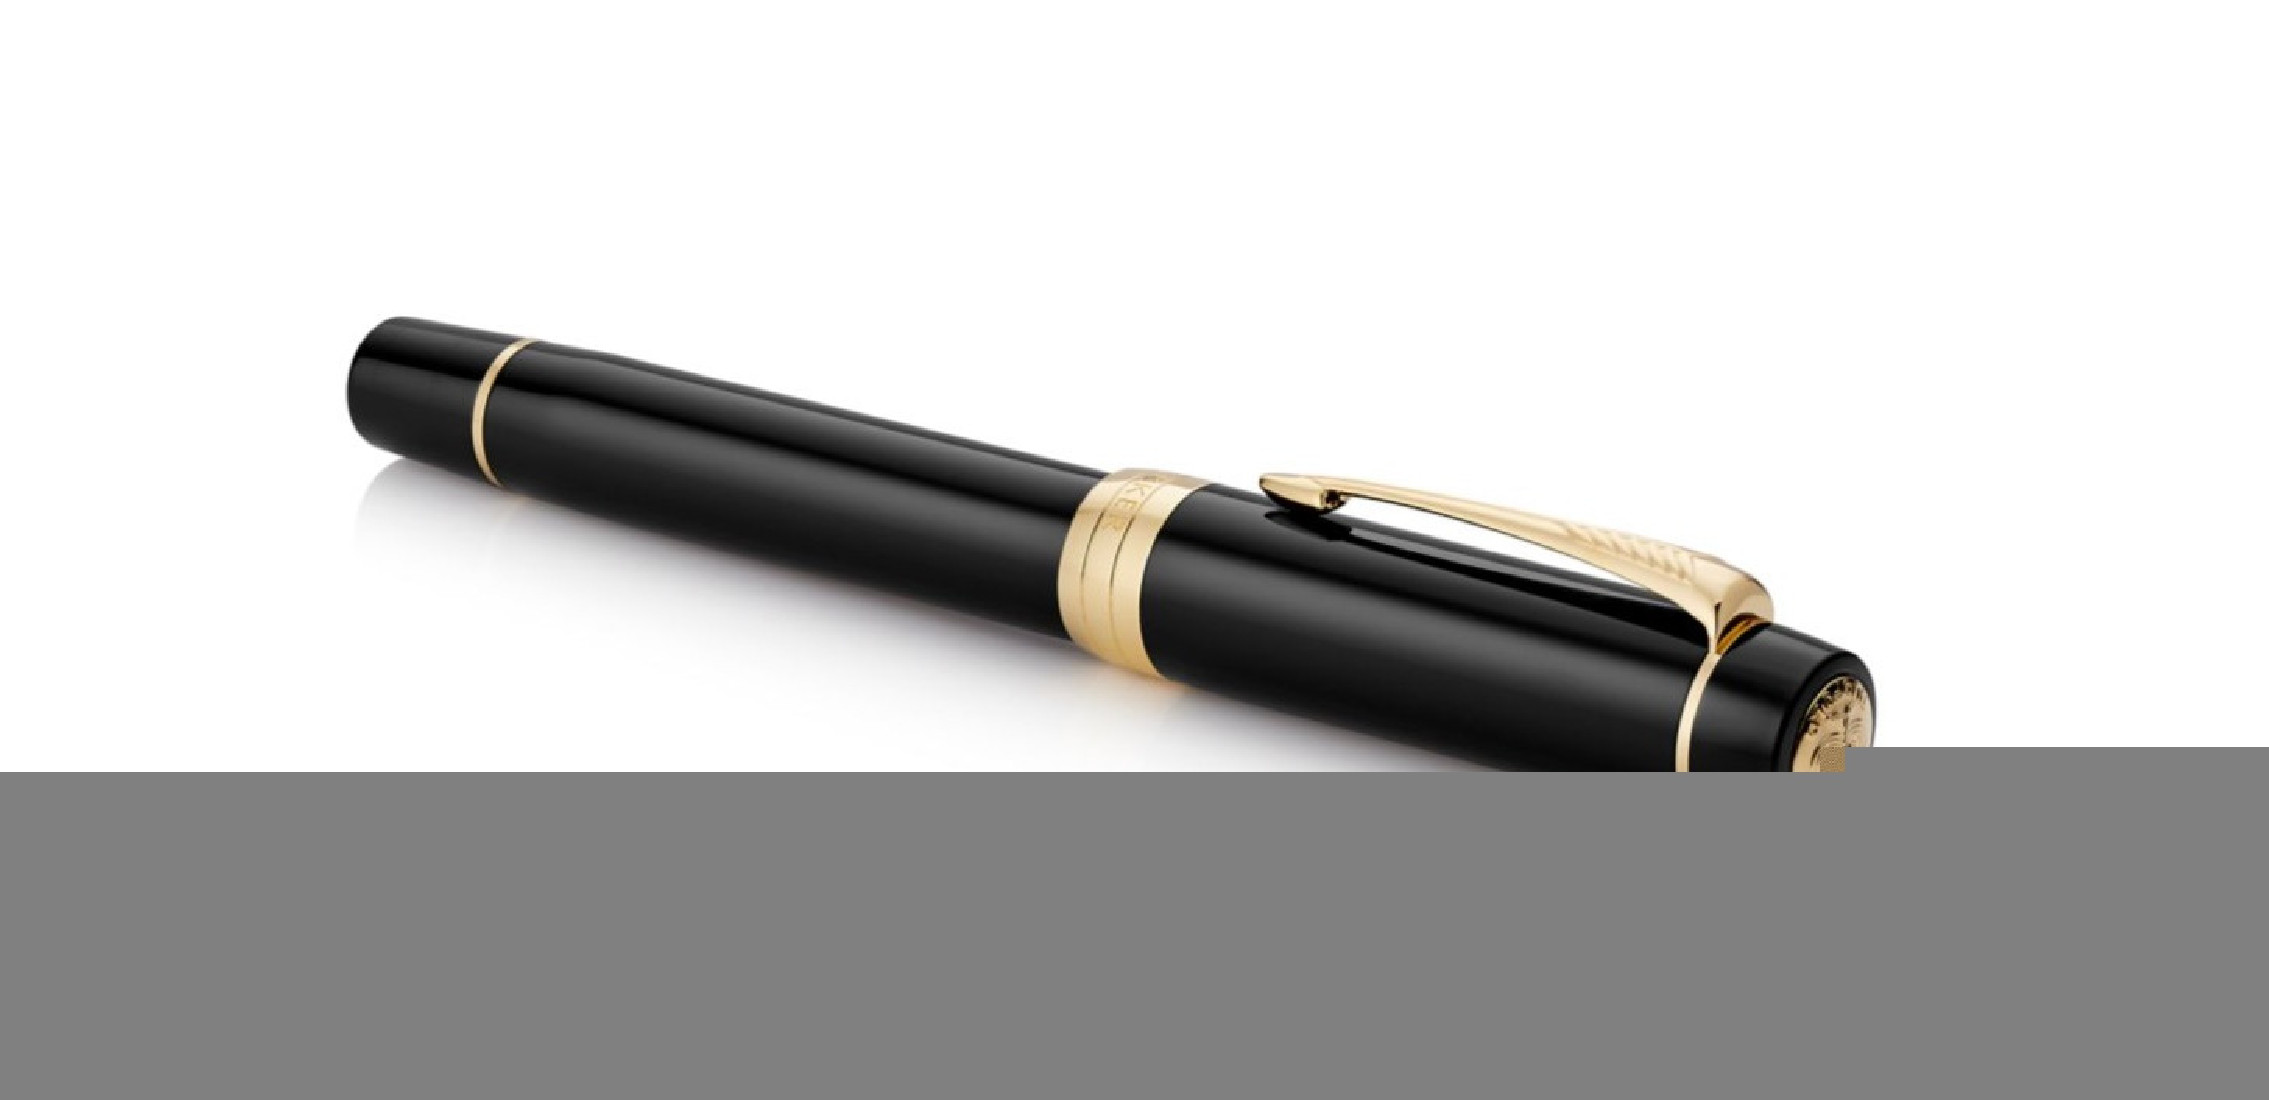 Parker Duofold International Fountain Pen, Classic Black with Gold Trim, Solid Gold Nib, Black Ink and Converter